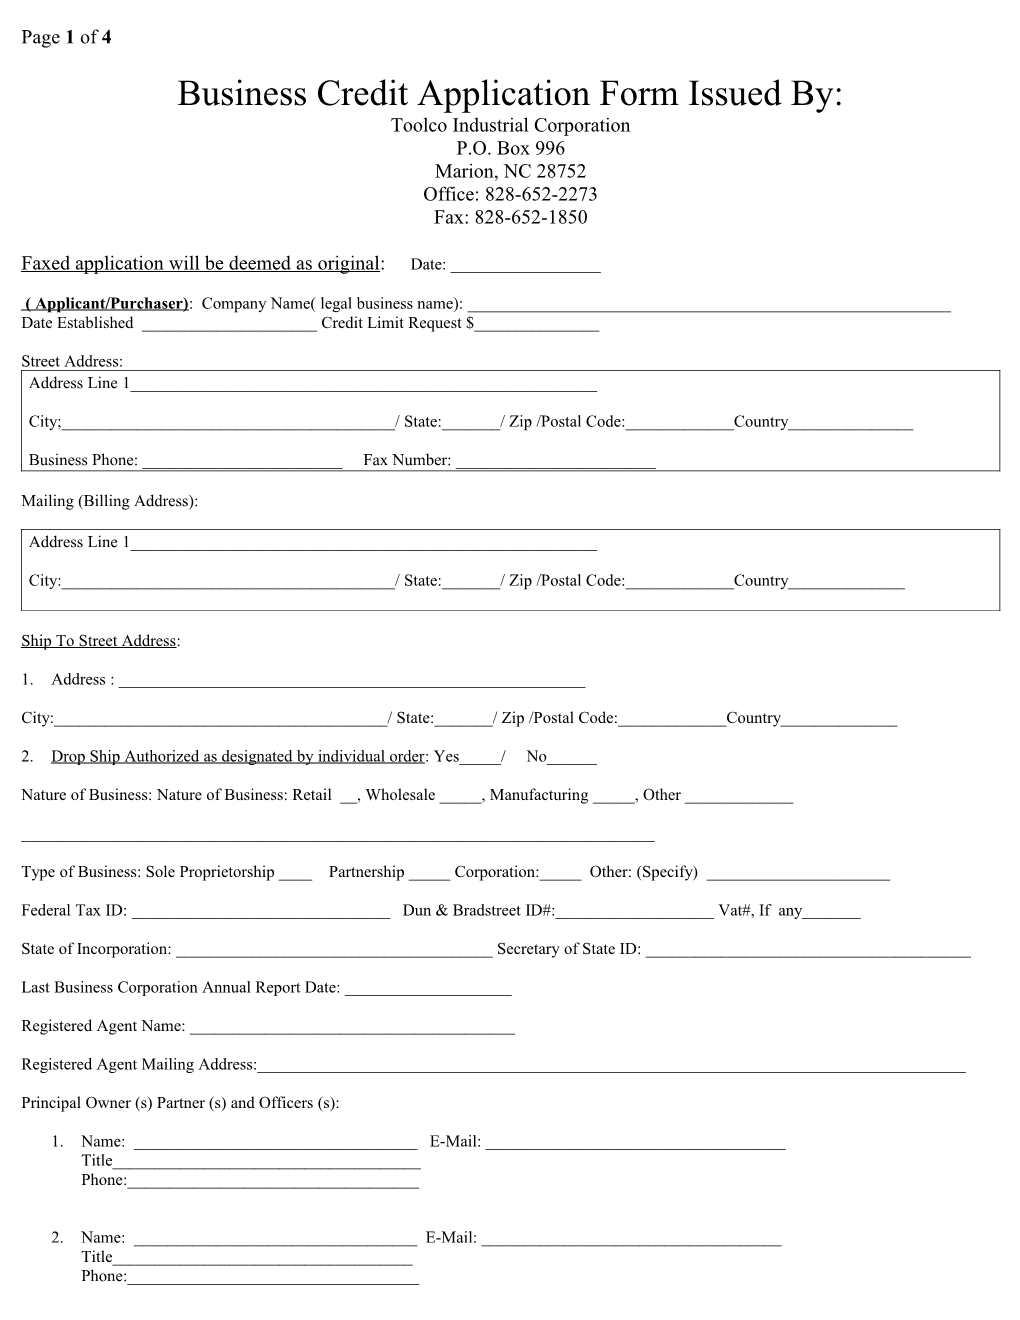 Business Credit Application Form Issued By